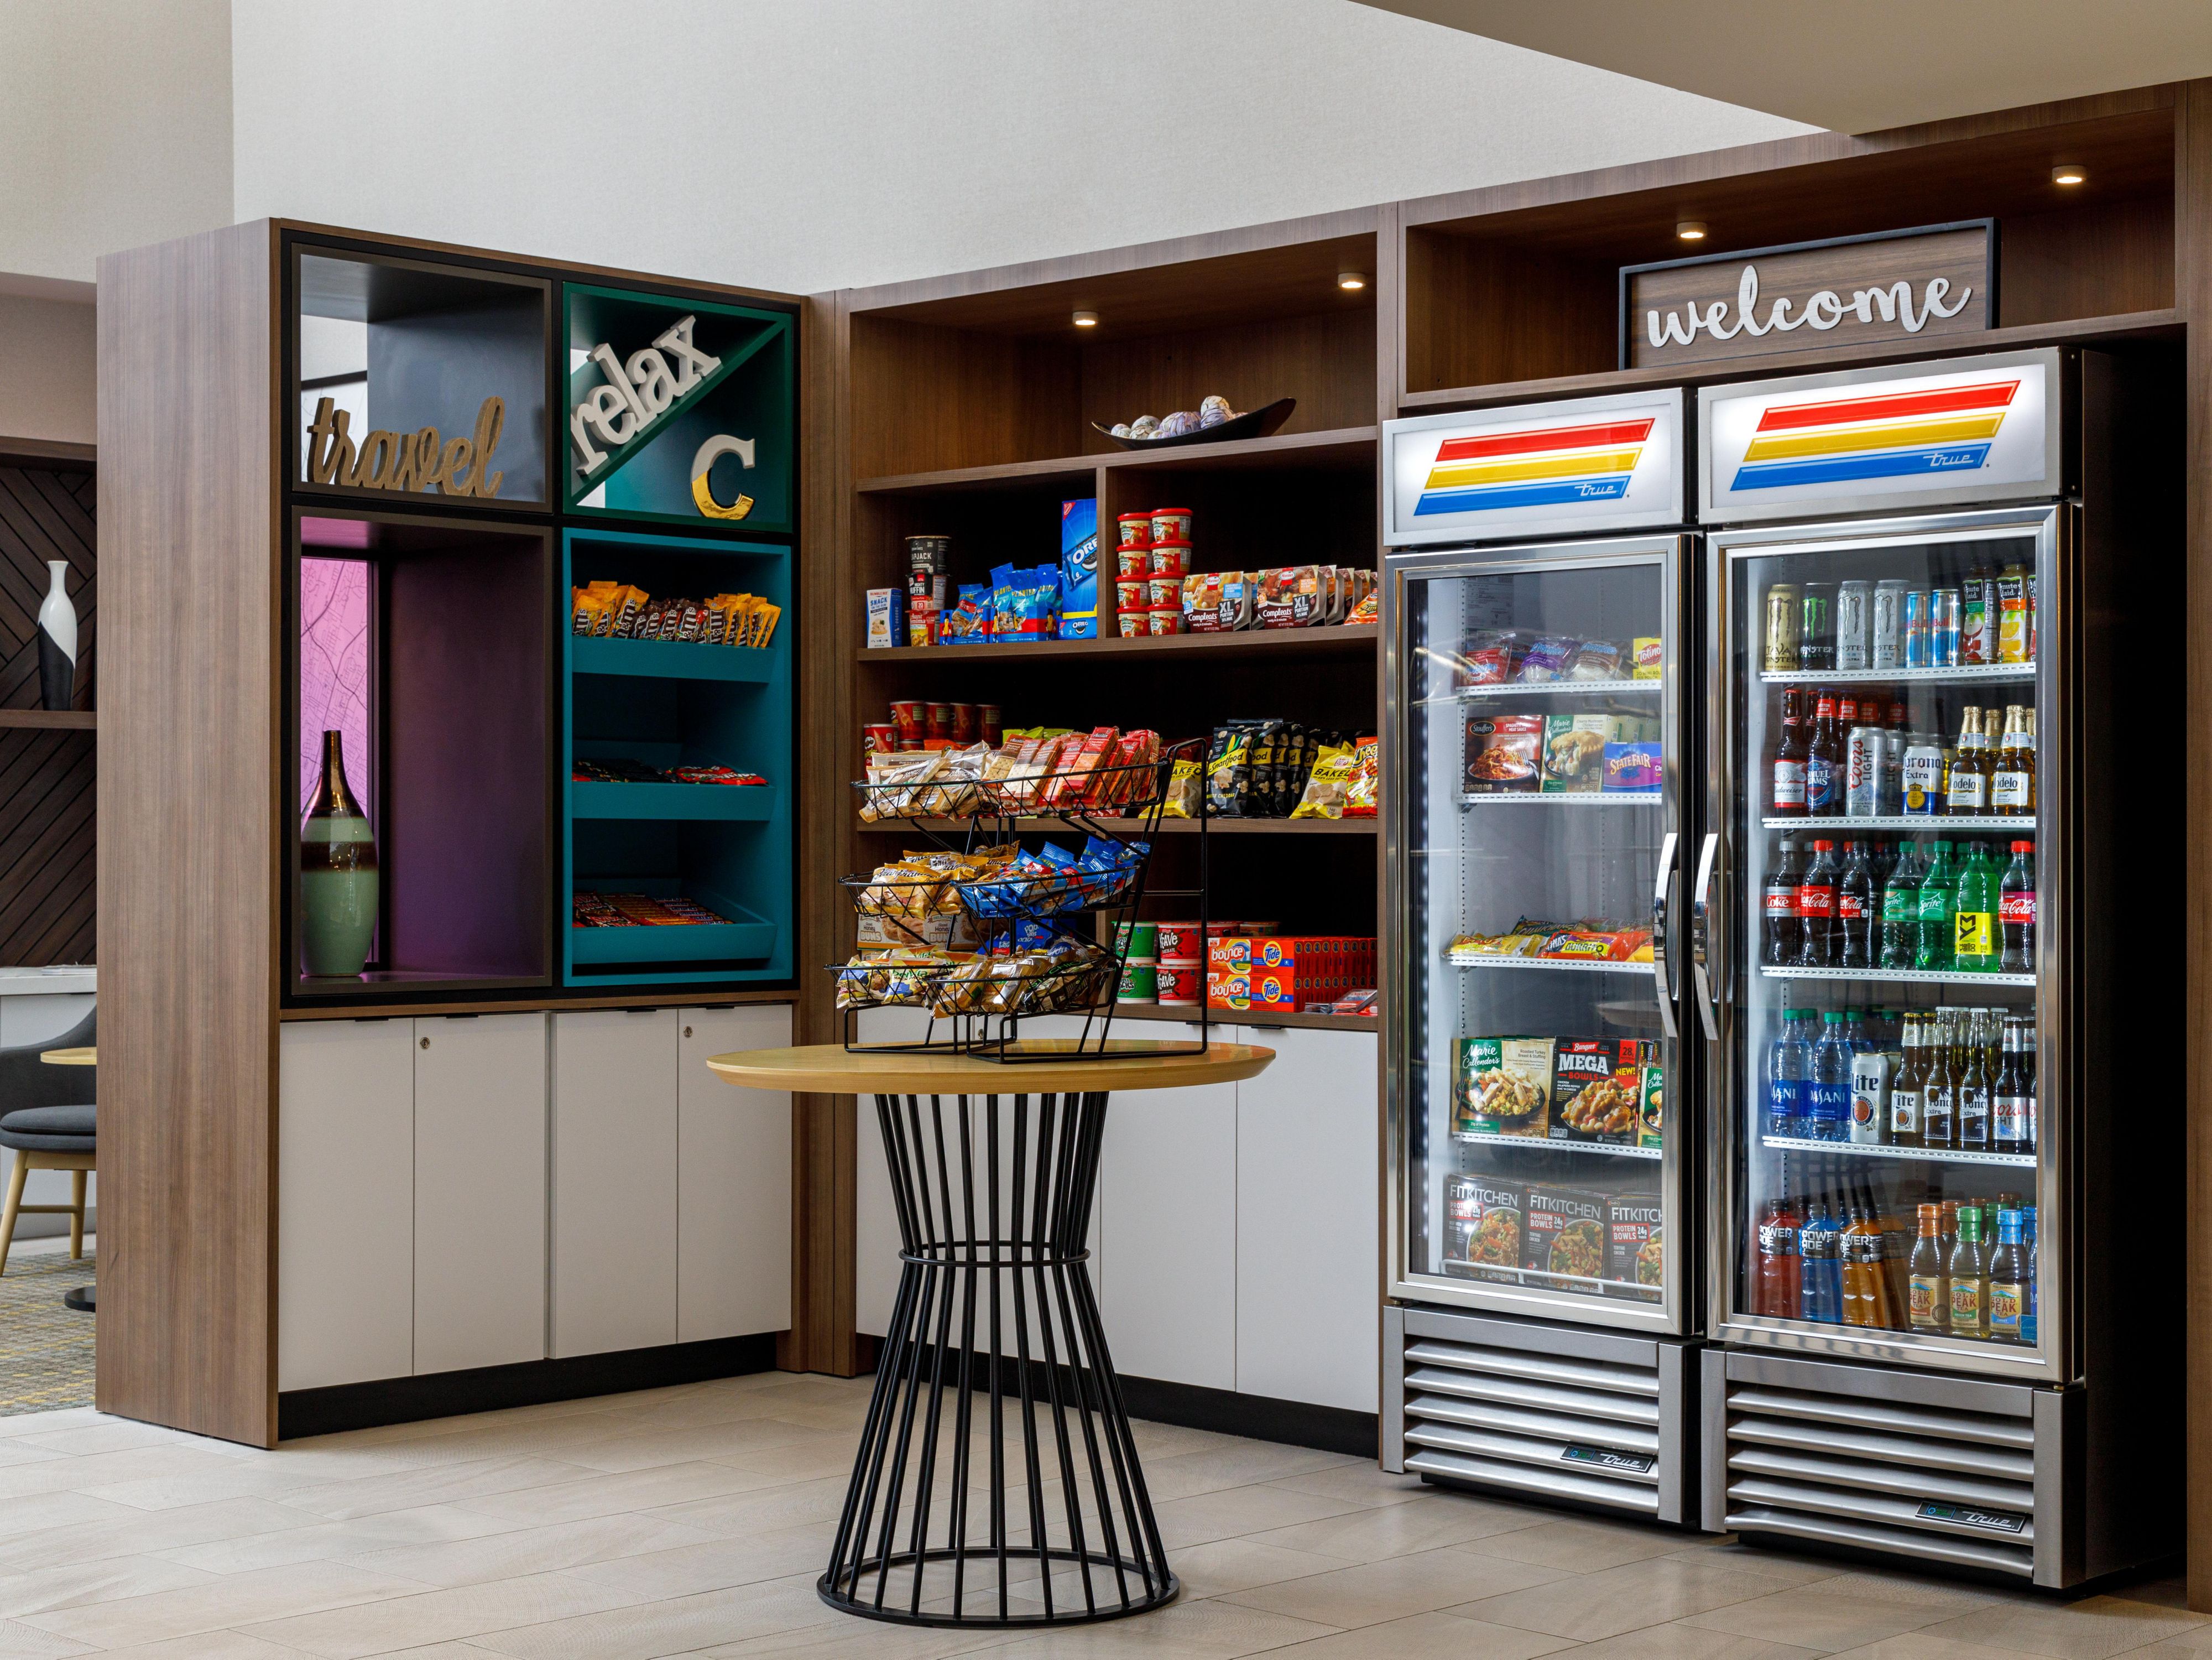 Visit our Marketplace in the lobby for sundries like ice cream, candy bars, salty snacks, chips, frozen grab and go food like pizza, Hot Pockets, microwavable food and more!  We also have a supply of toiletries you may need during your stay plus laundry detergent and beer.